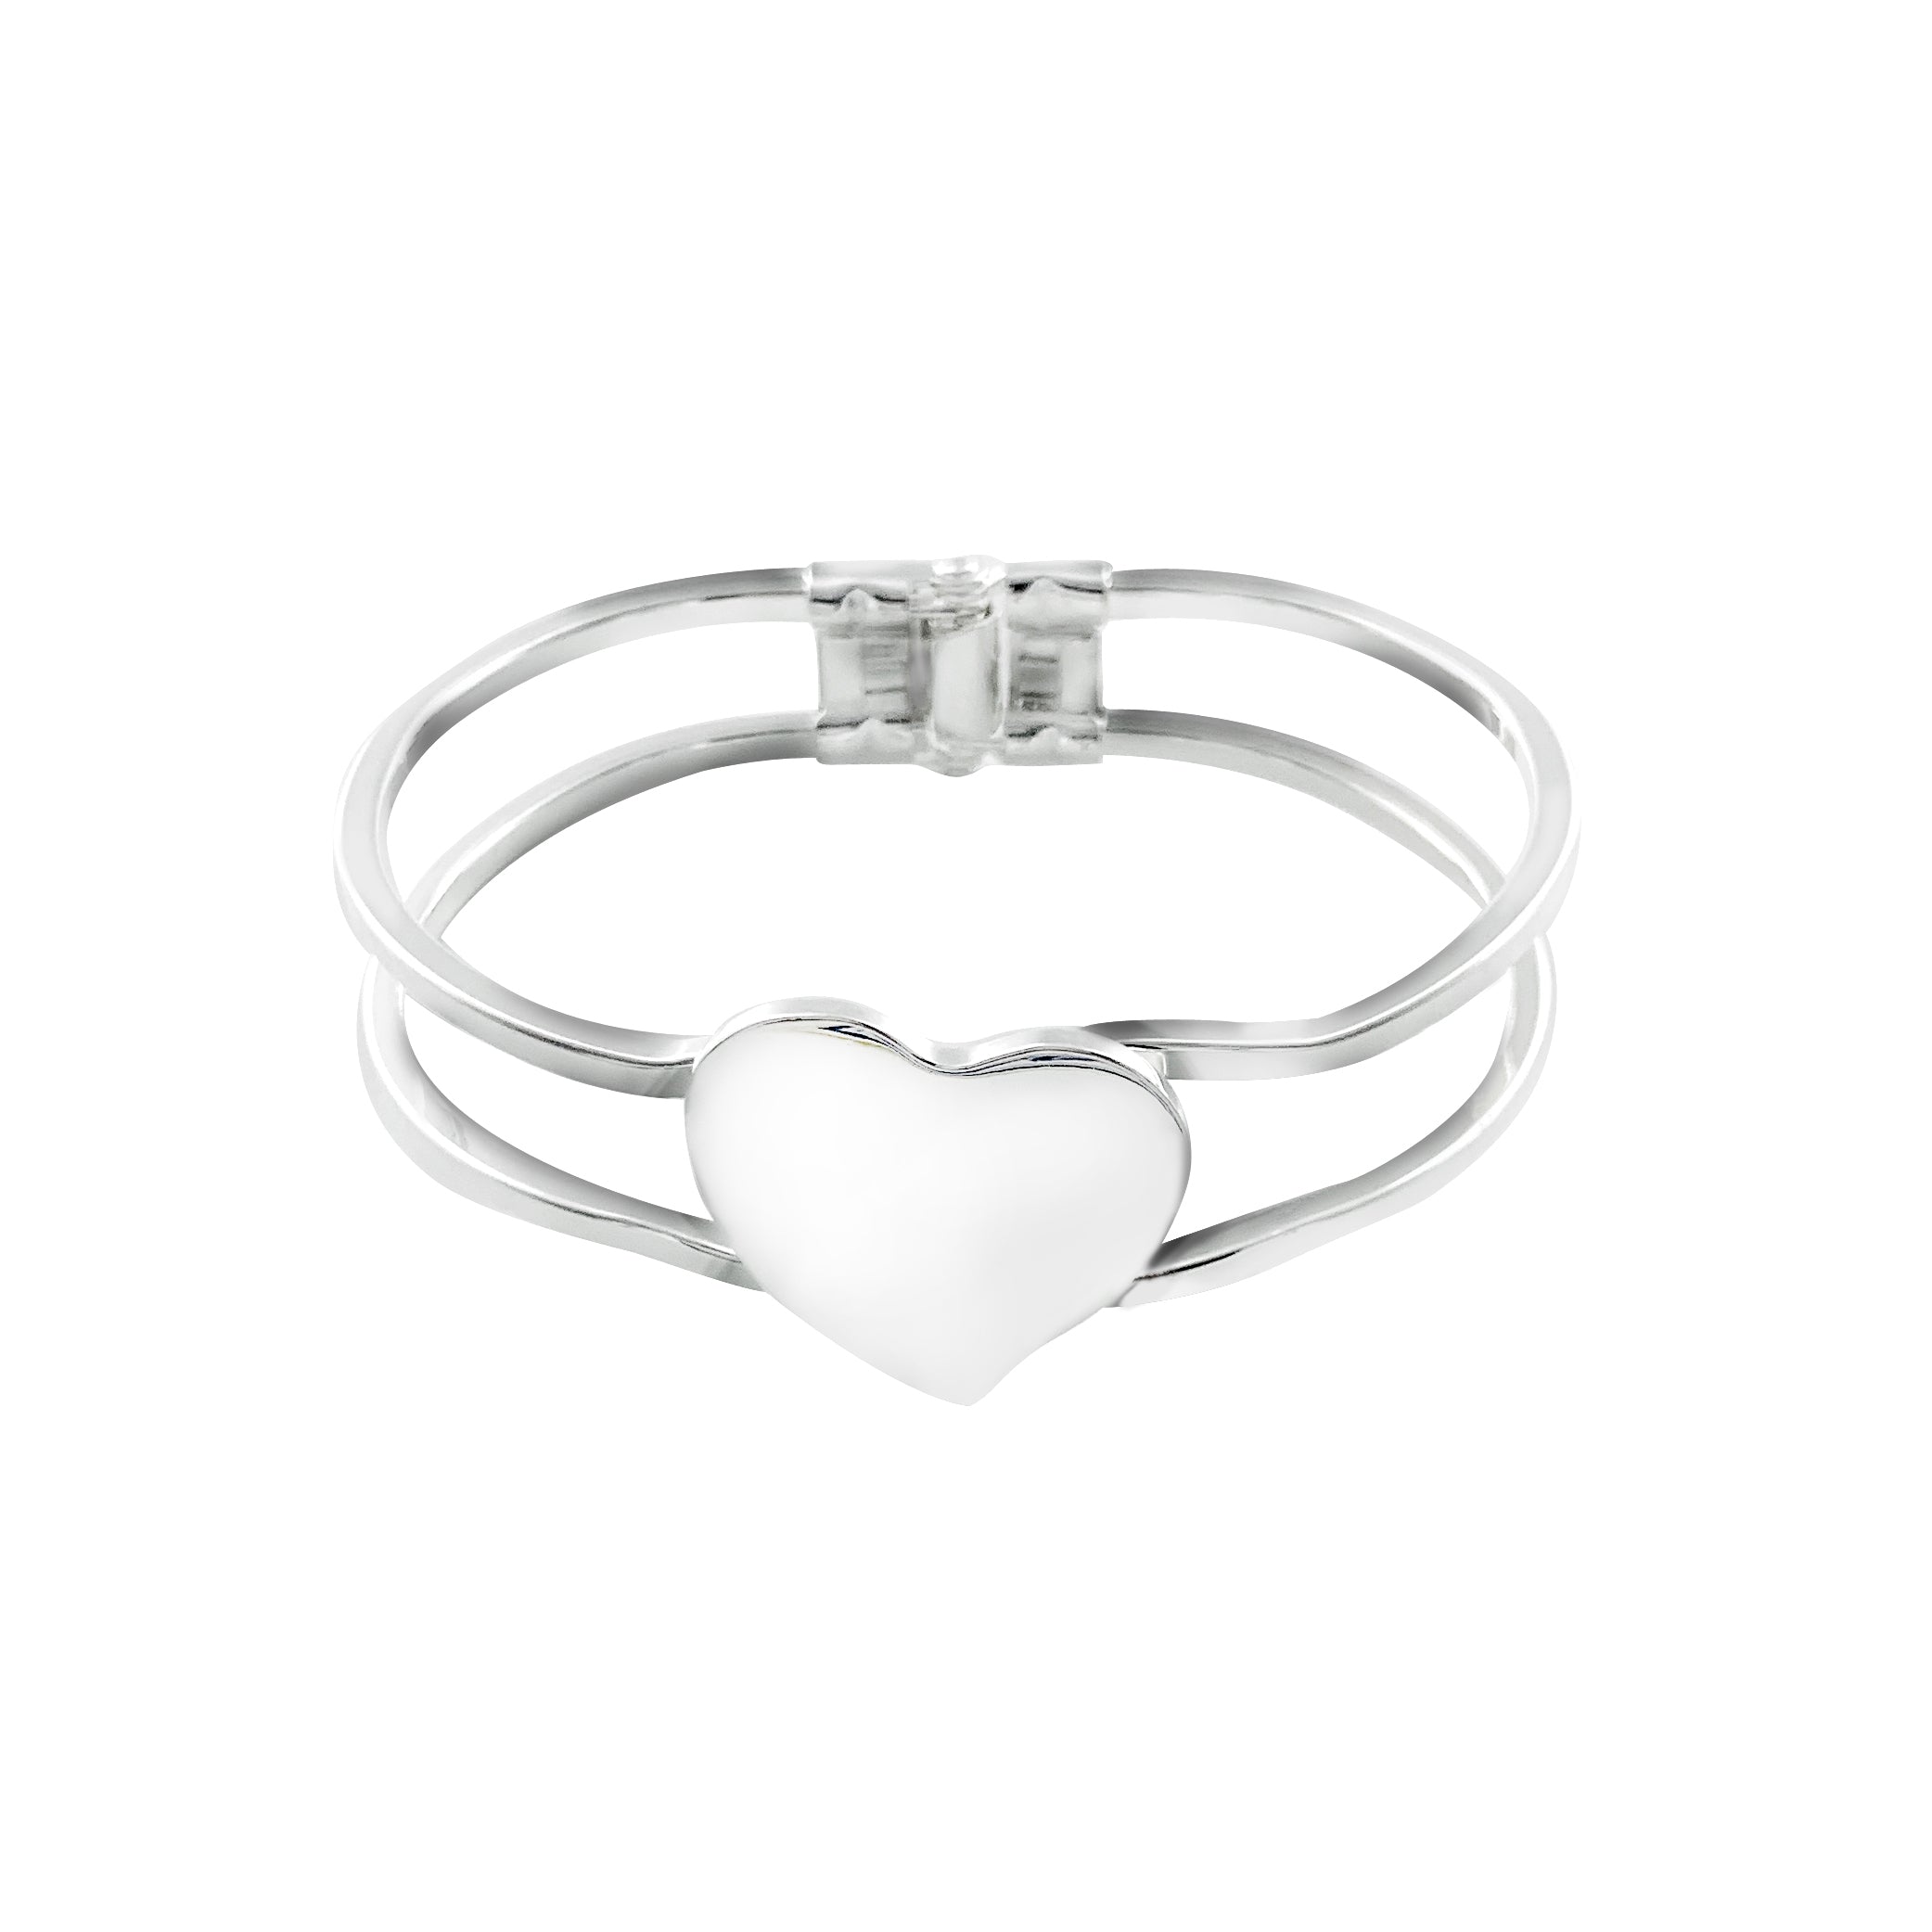 Thin silver bangle with heart design